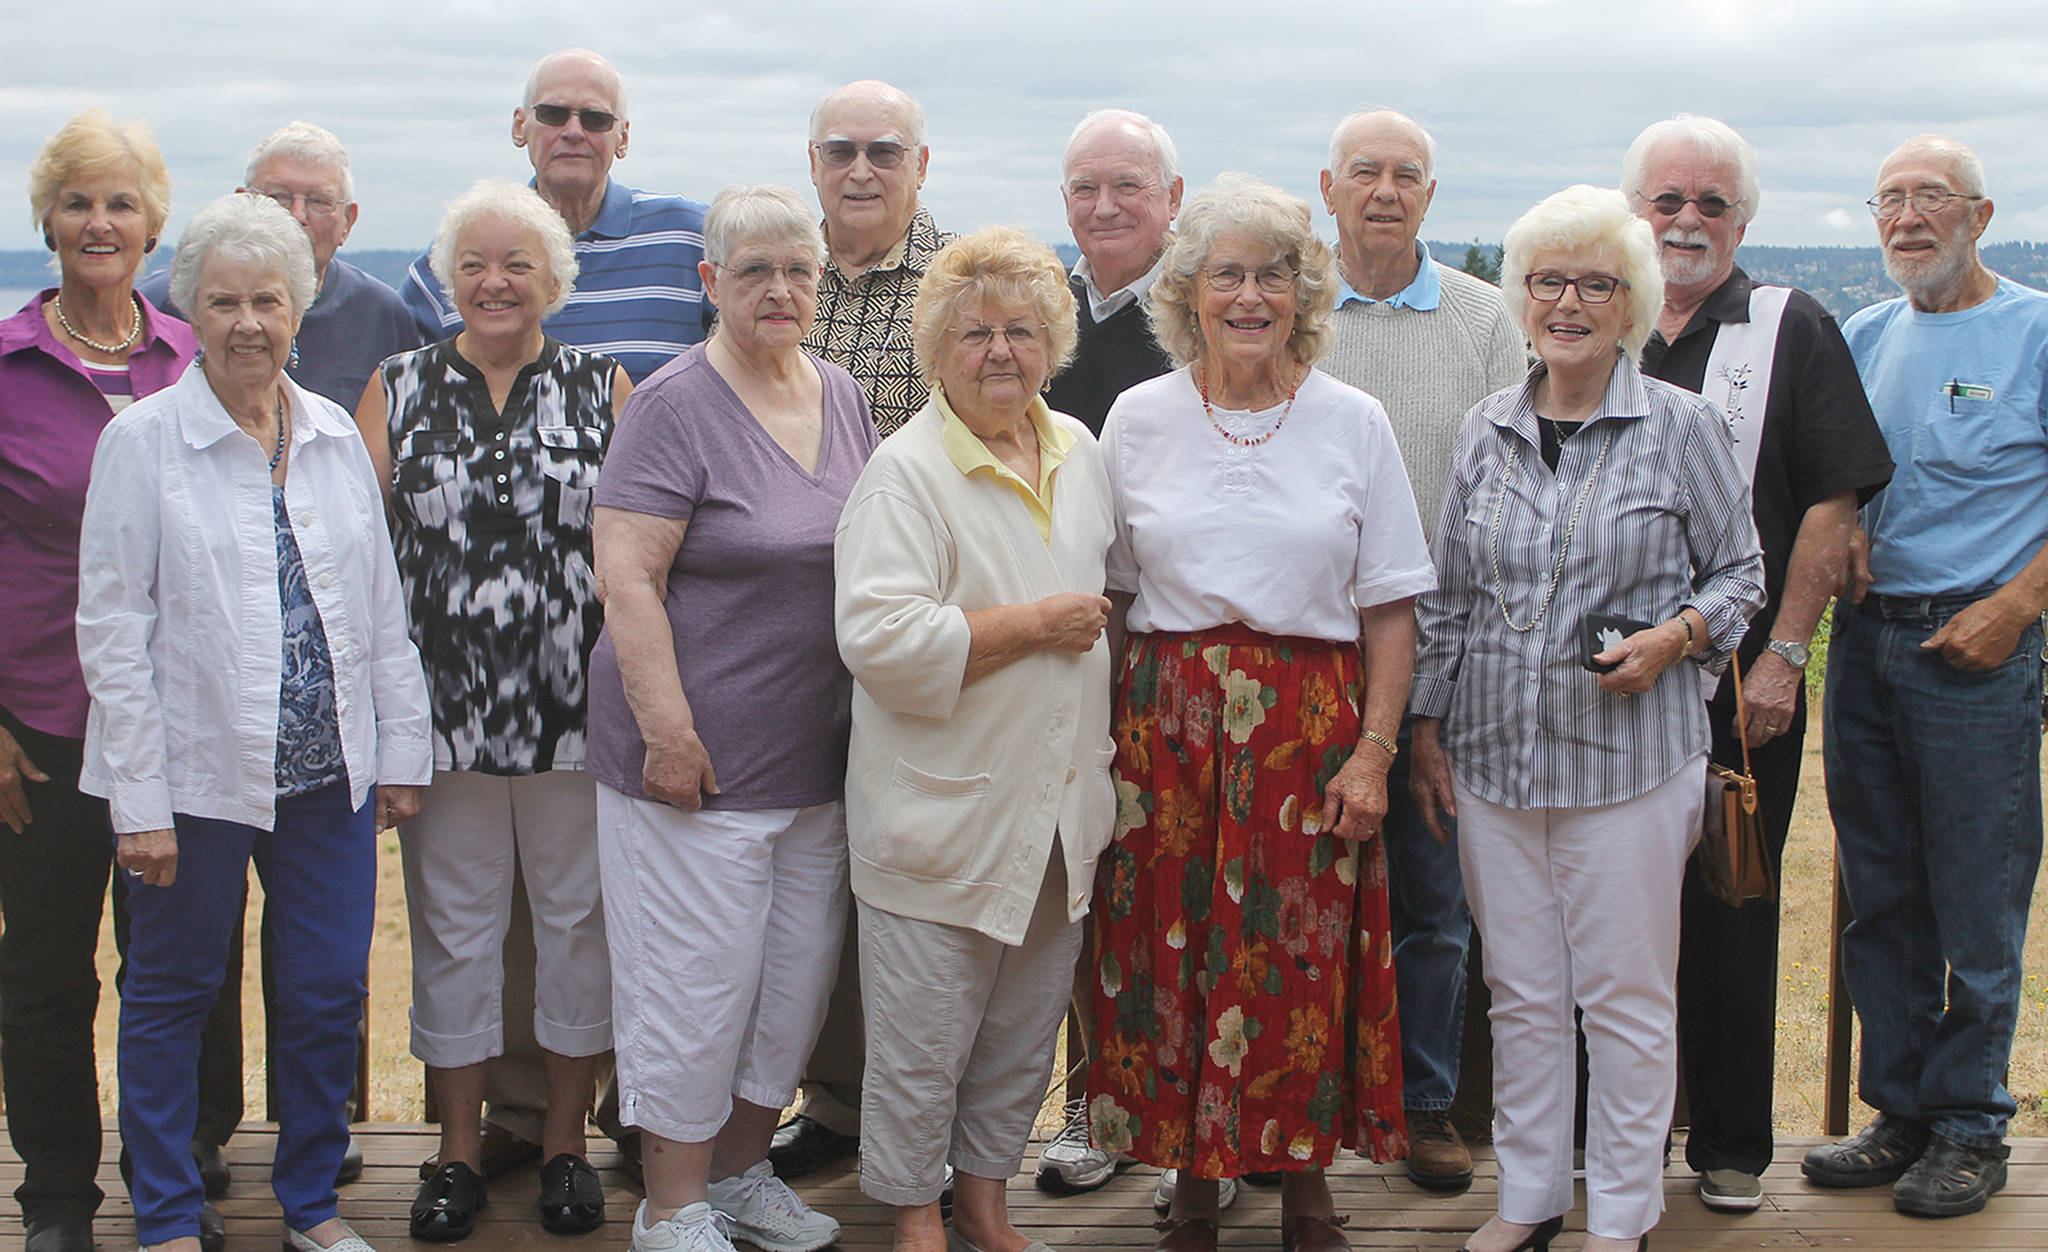 Reunion for LHS class of 1957 sparks old memories, rekindles friendships